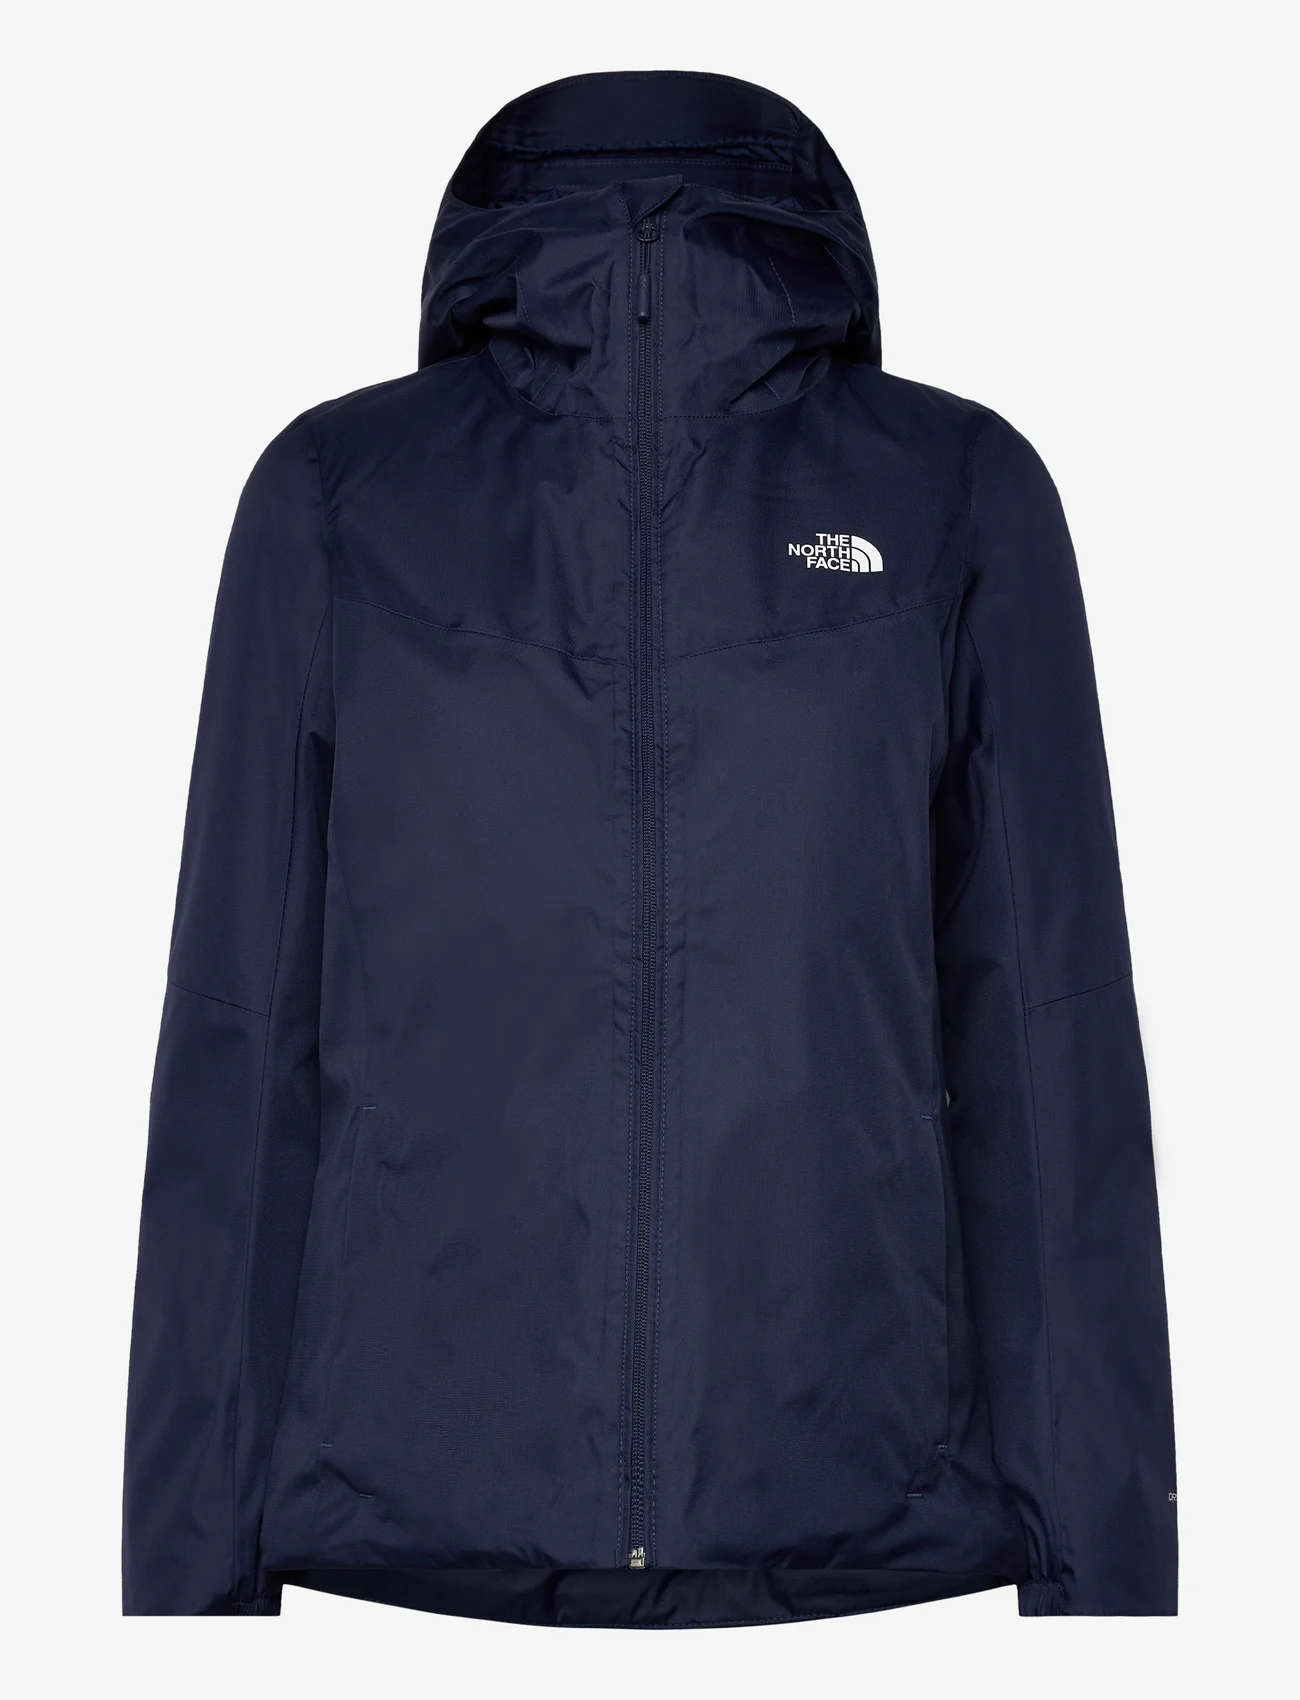 The North Face - W QUEST INSULATED JACKET - EU - outdoor & rain jackets - summit navy - 0